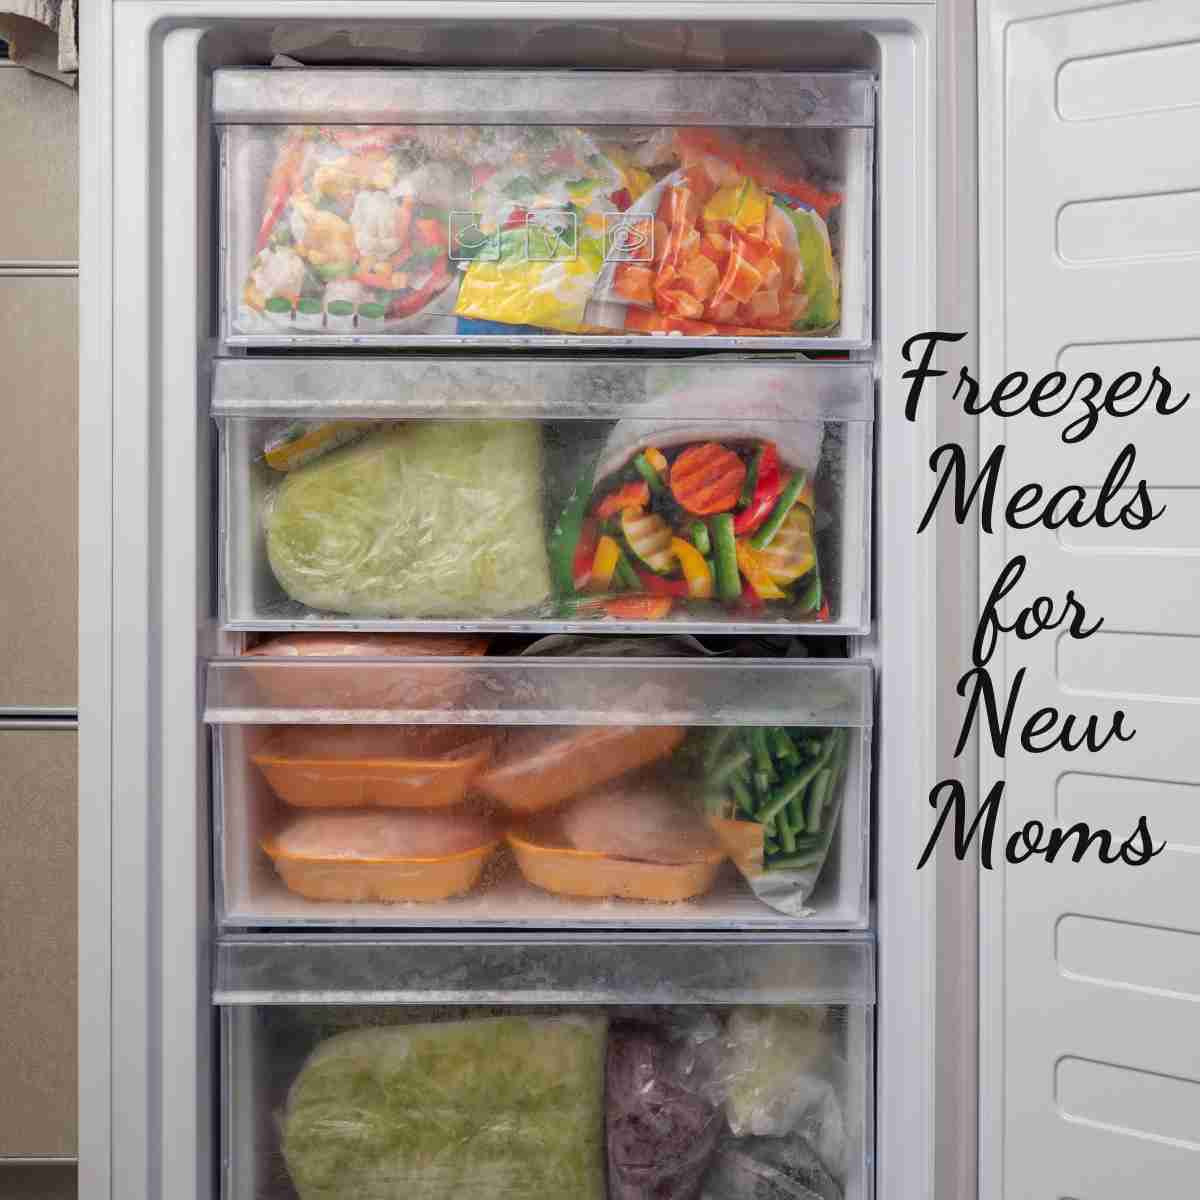 Quick & Delicious Freezer Meals for New Moms